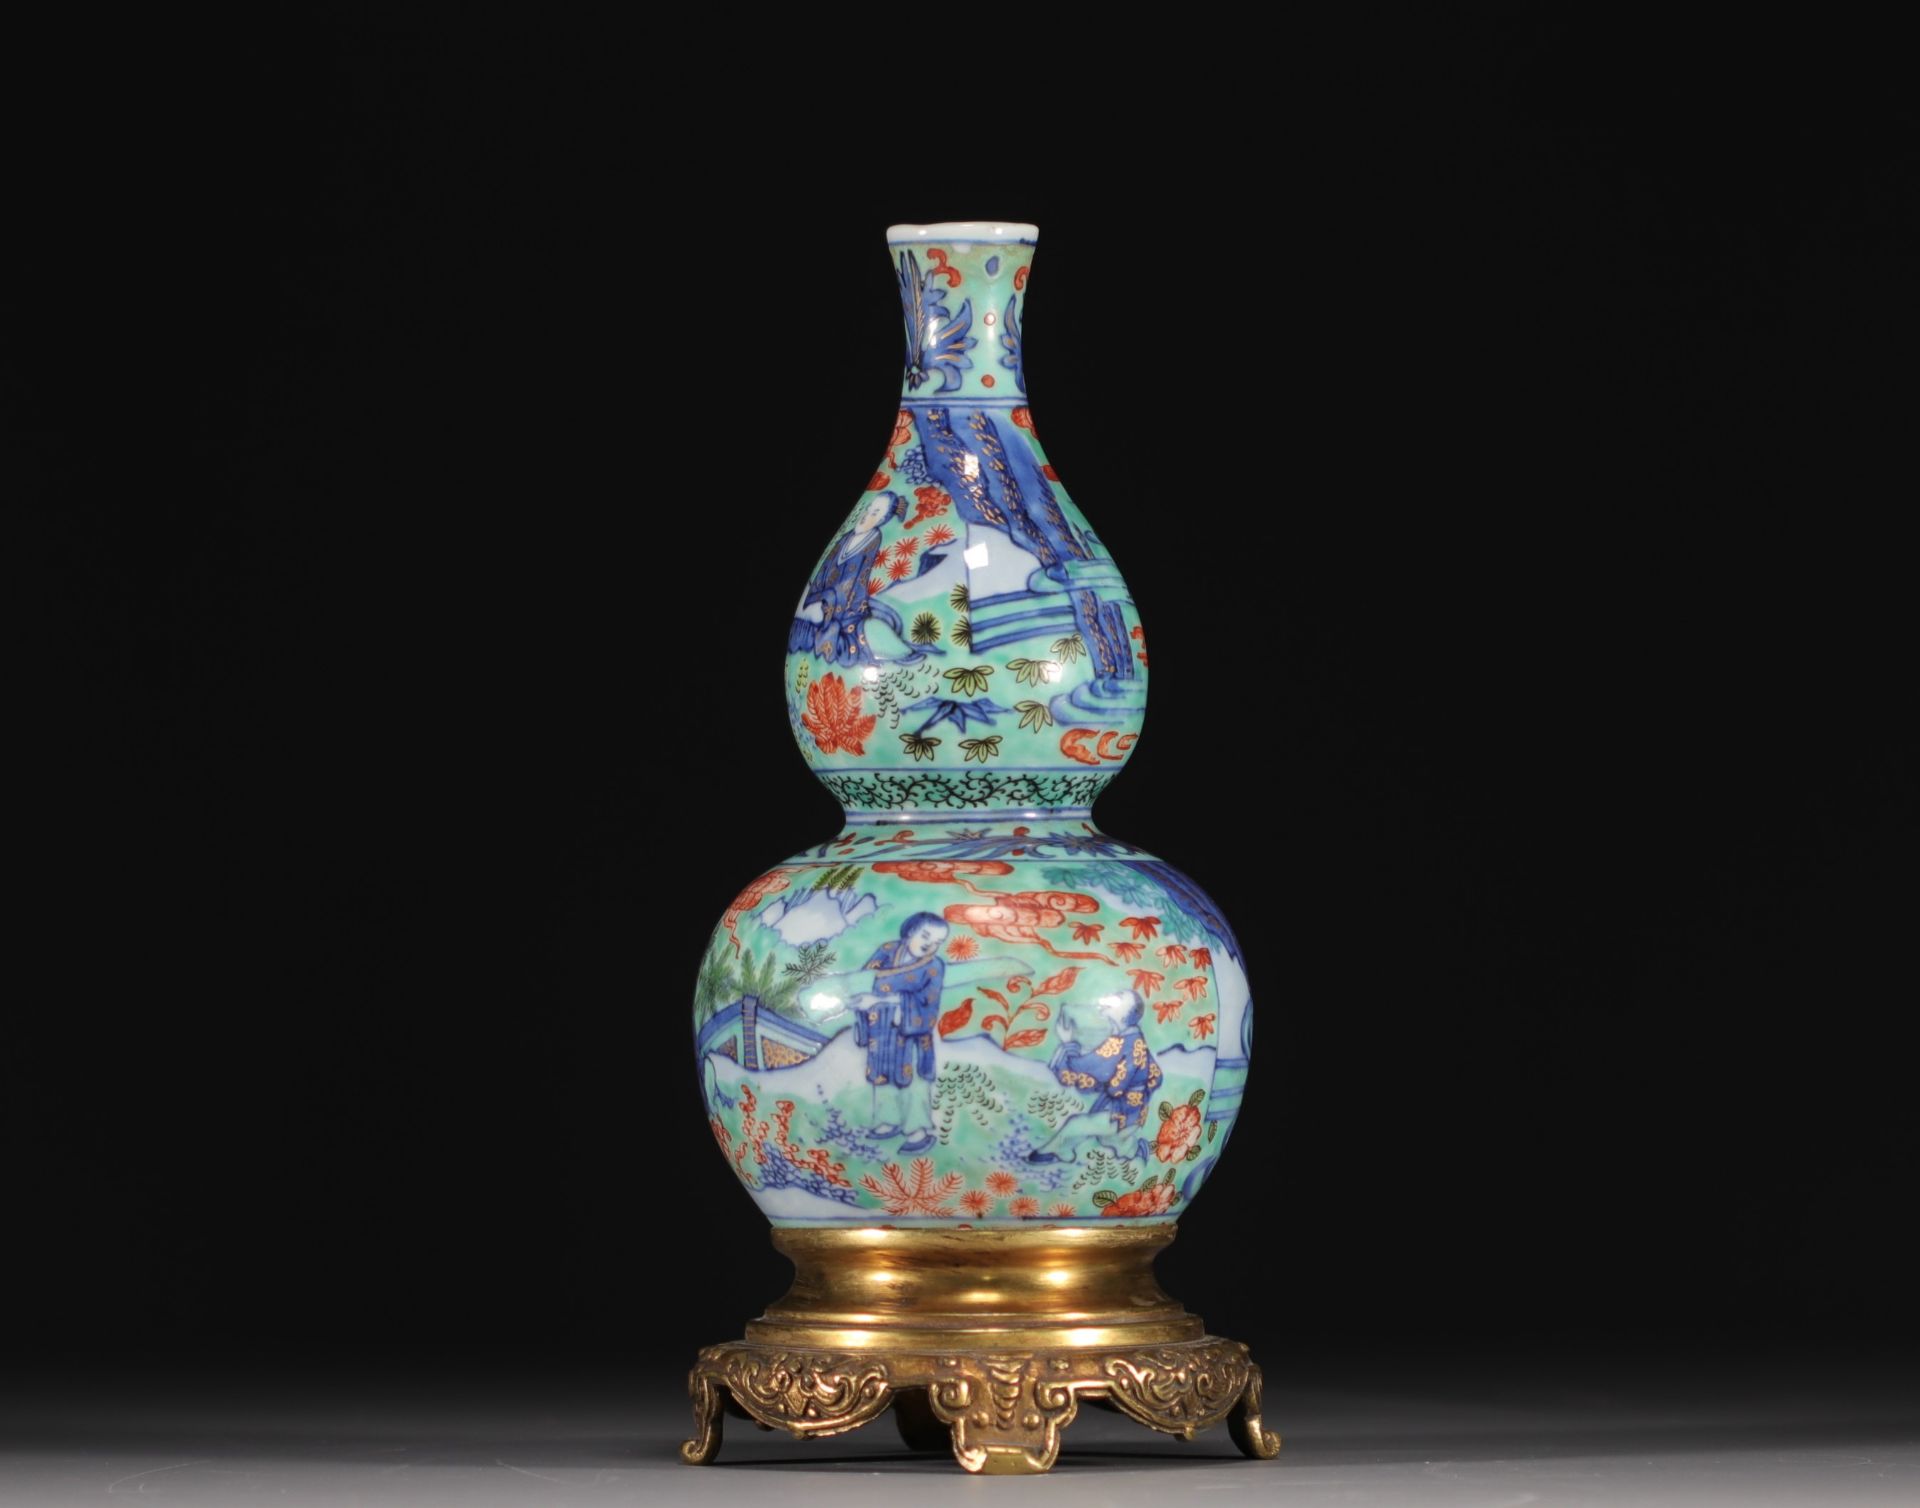 China - Porcelain double gourd vase with figures, gilt bronze mounting, Qing period. - Image 3 of 6